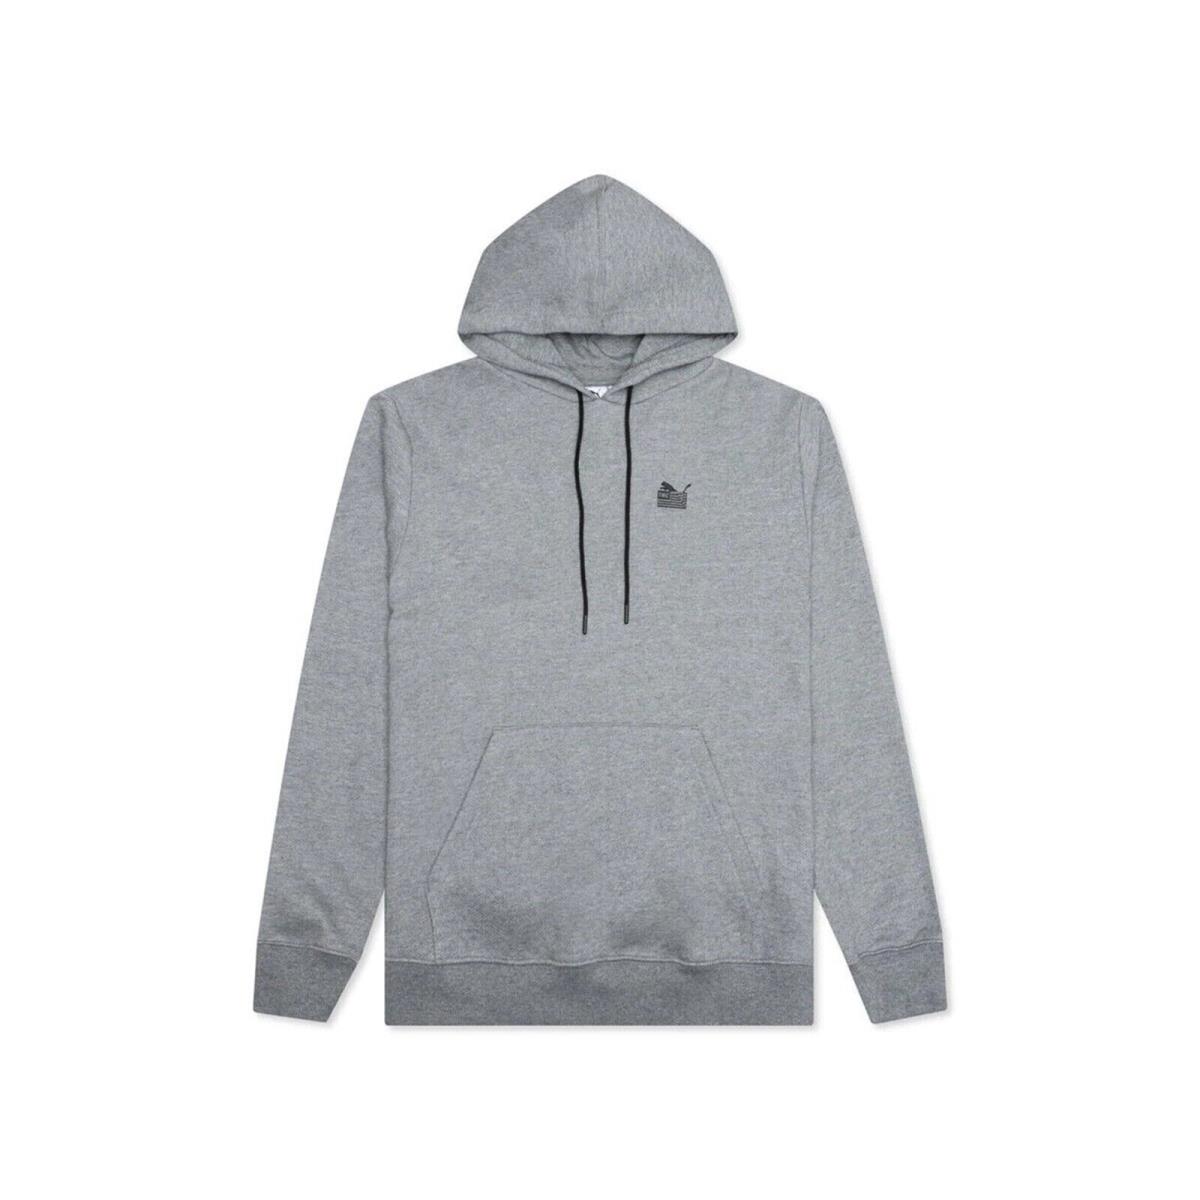 Puma x Tmc Every Day Hussle Grey Pullover Men`s Hoodie 533684-02